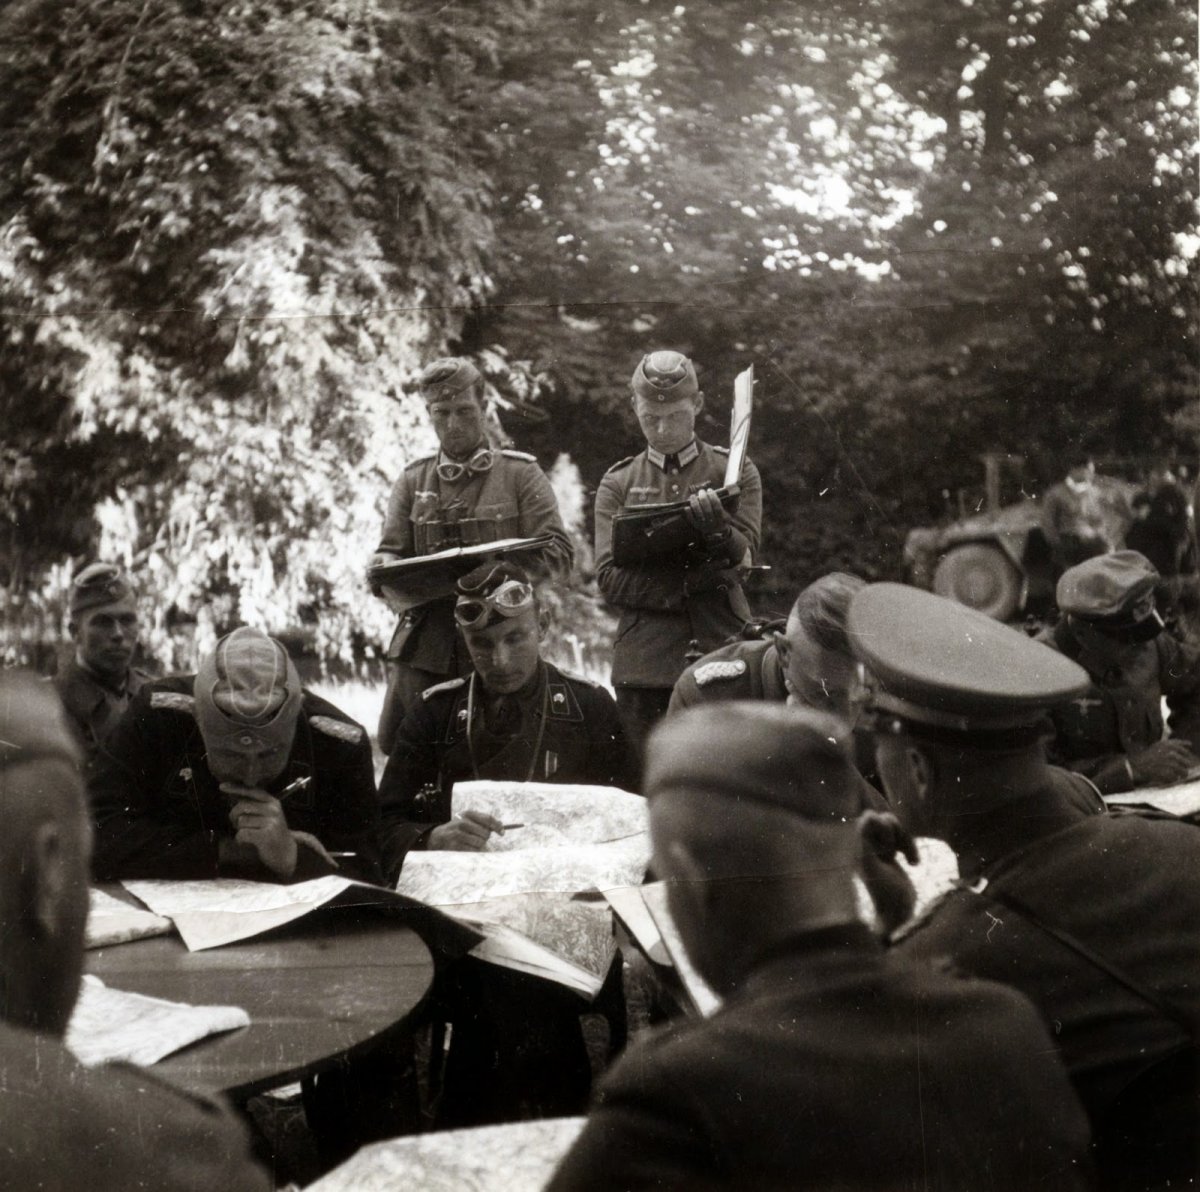 Erwin Rommel commander 7 panzer division trip to France 1940a.jpg